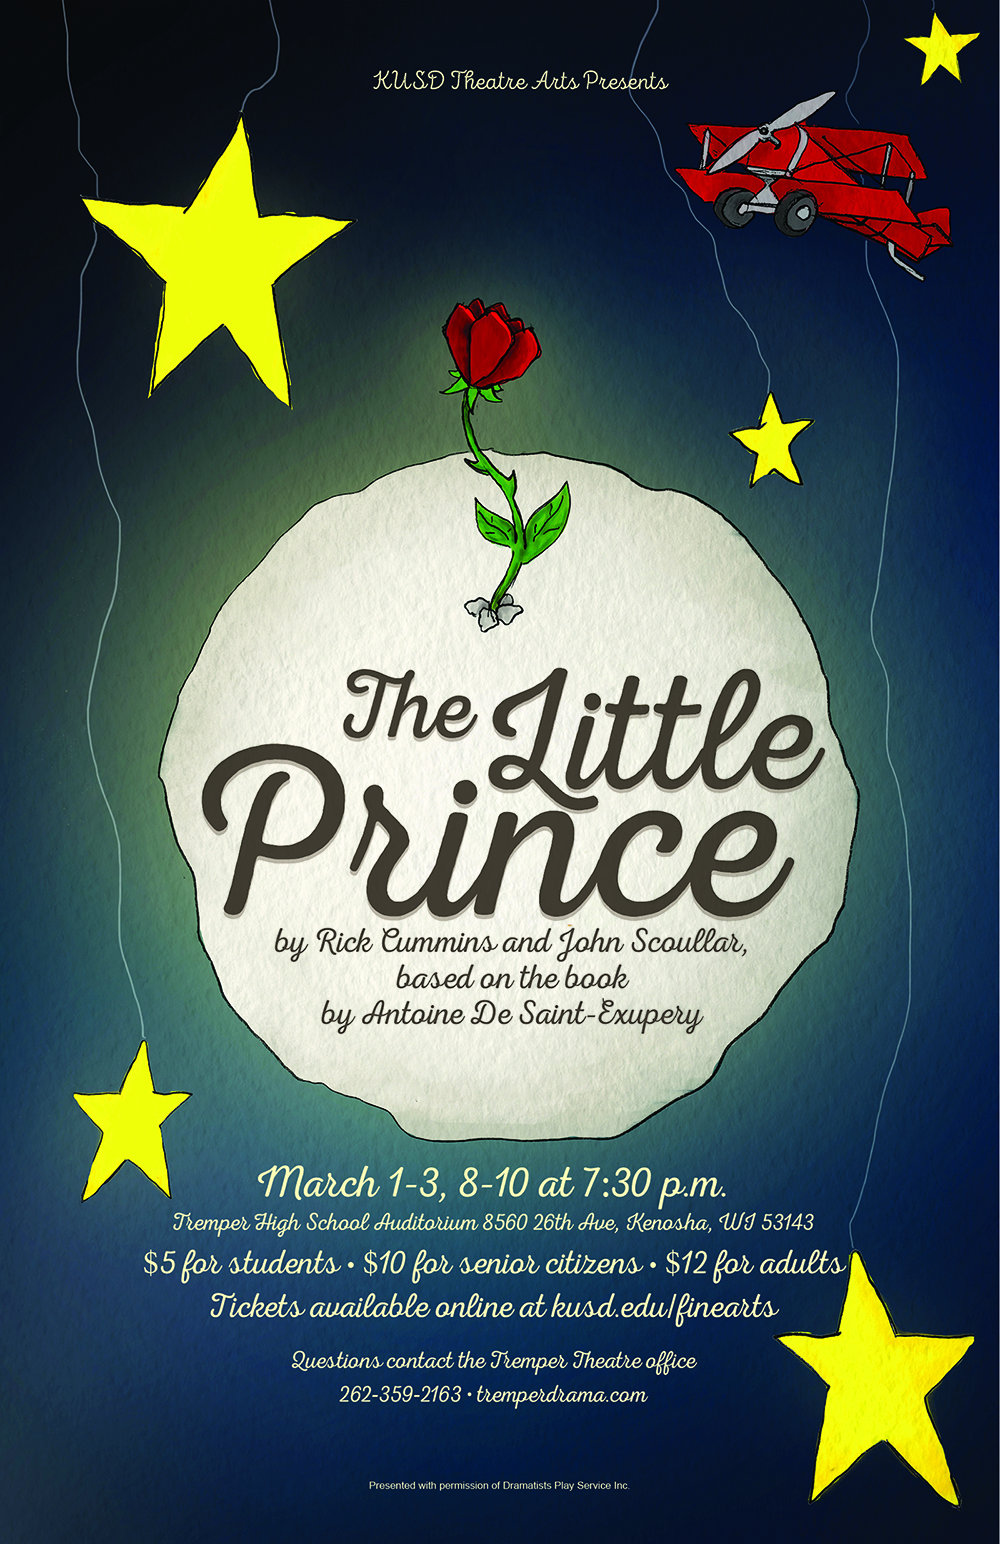 The poster for The Little Prince